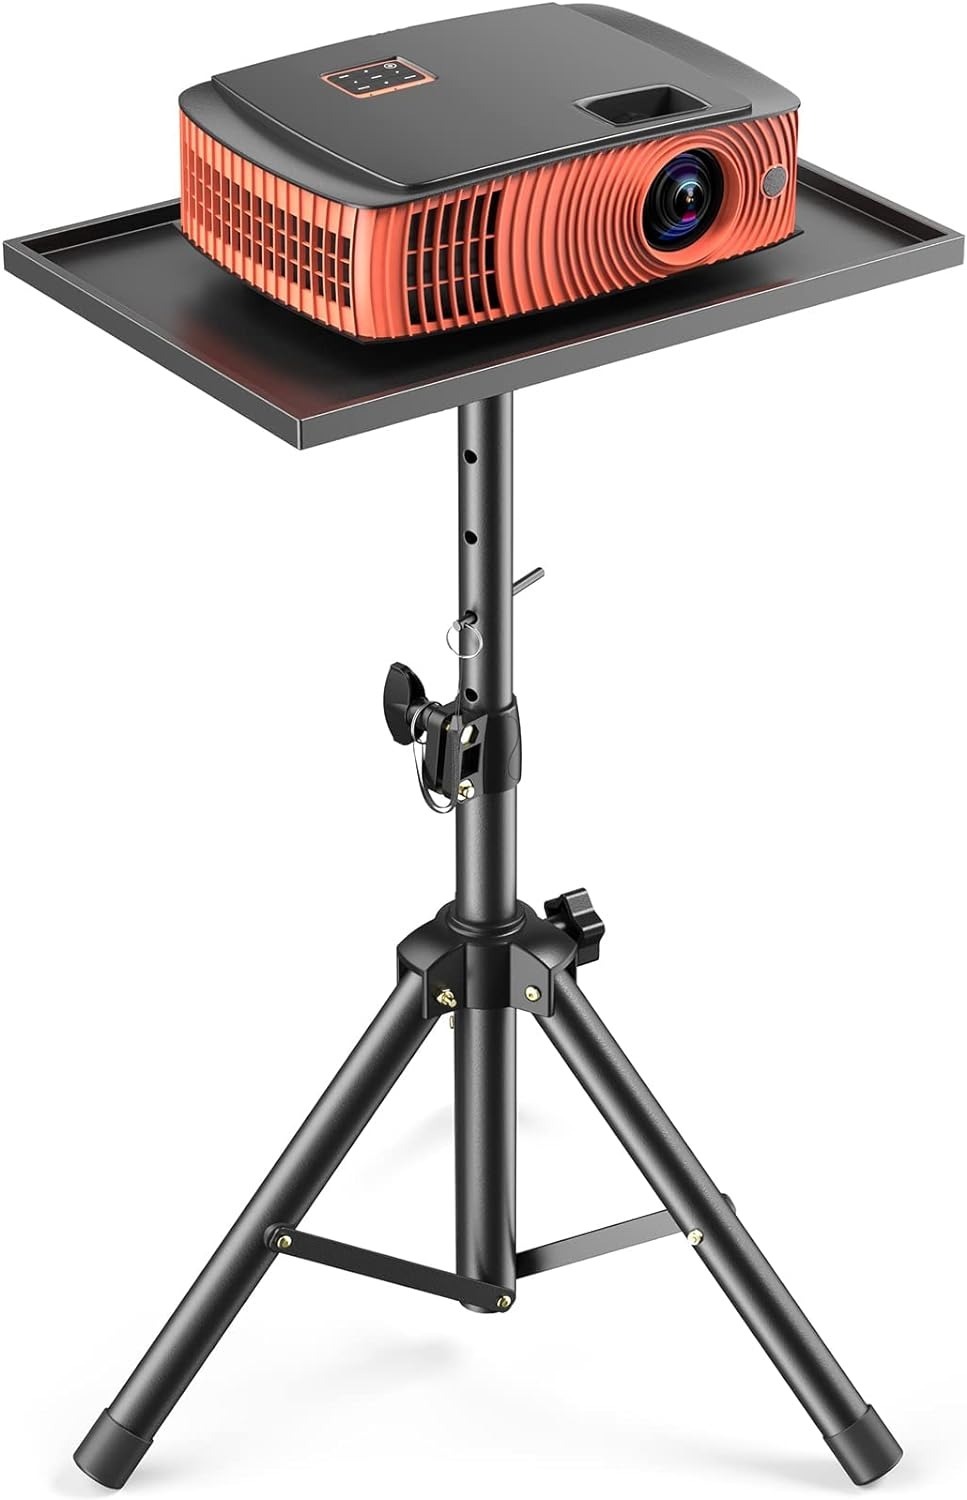 Amada Universal Adjustable Projector Tripod Stand (22" to 36") $18.91 +Free Shipping